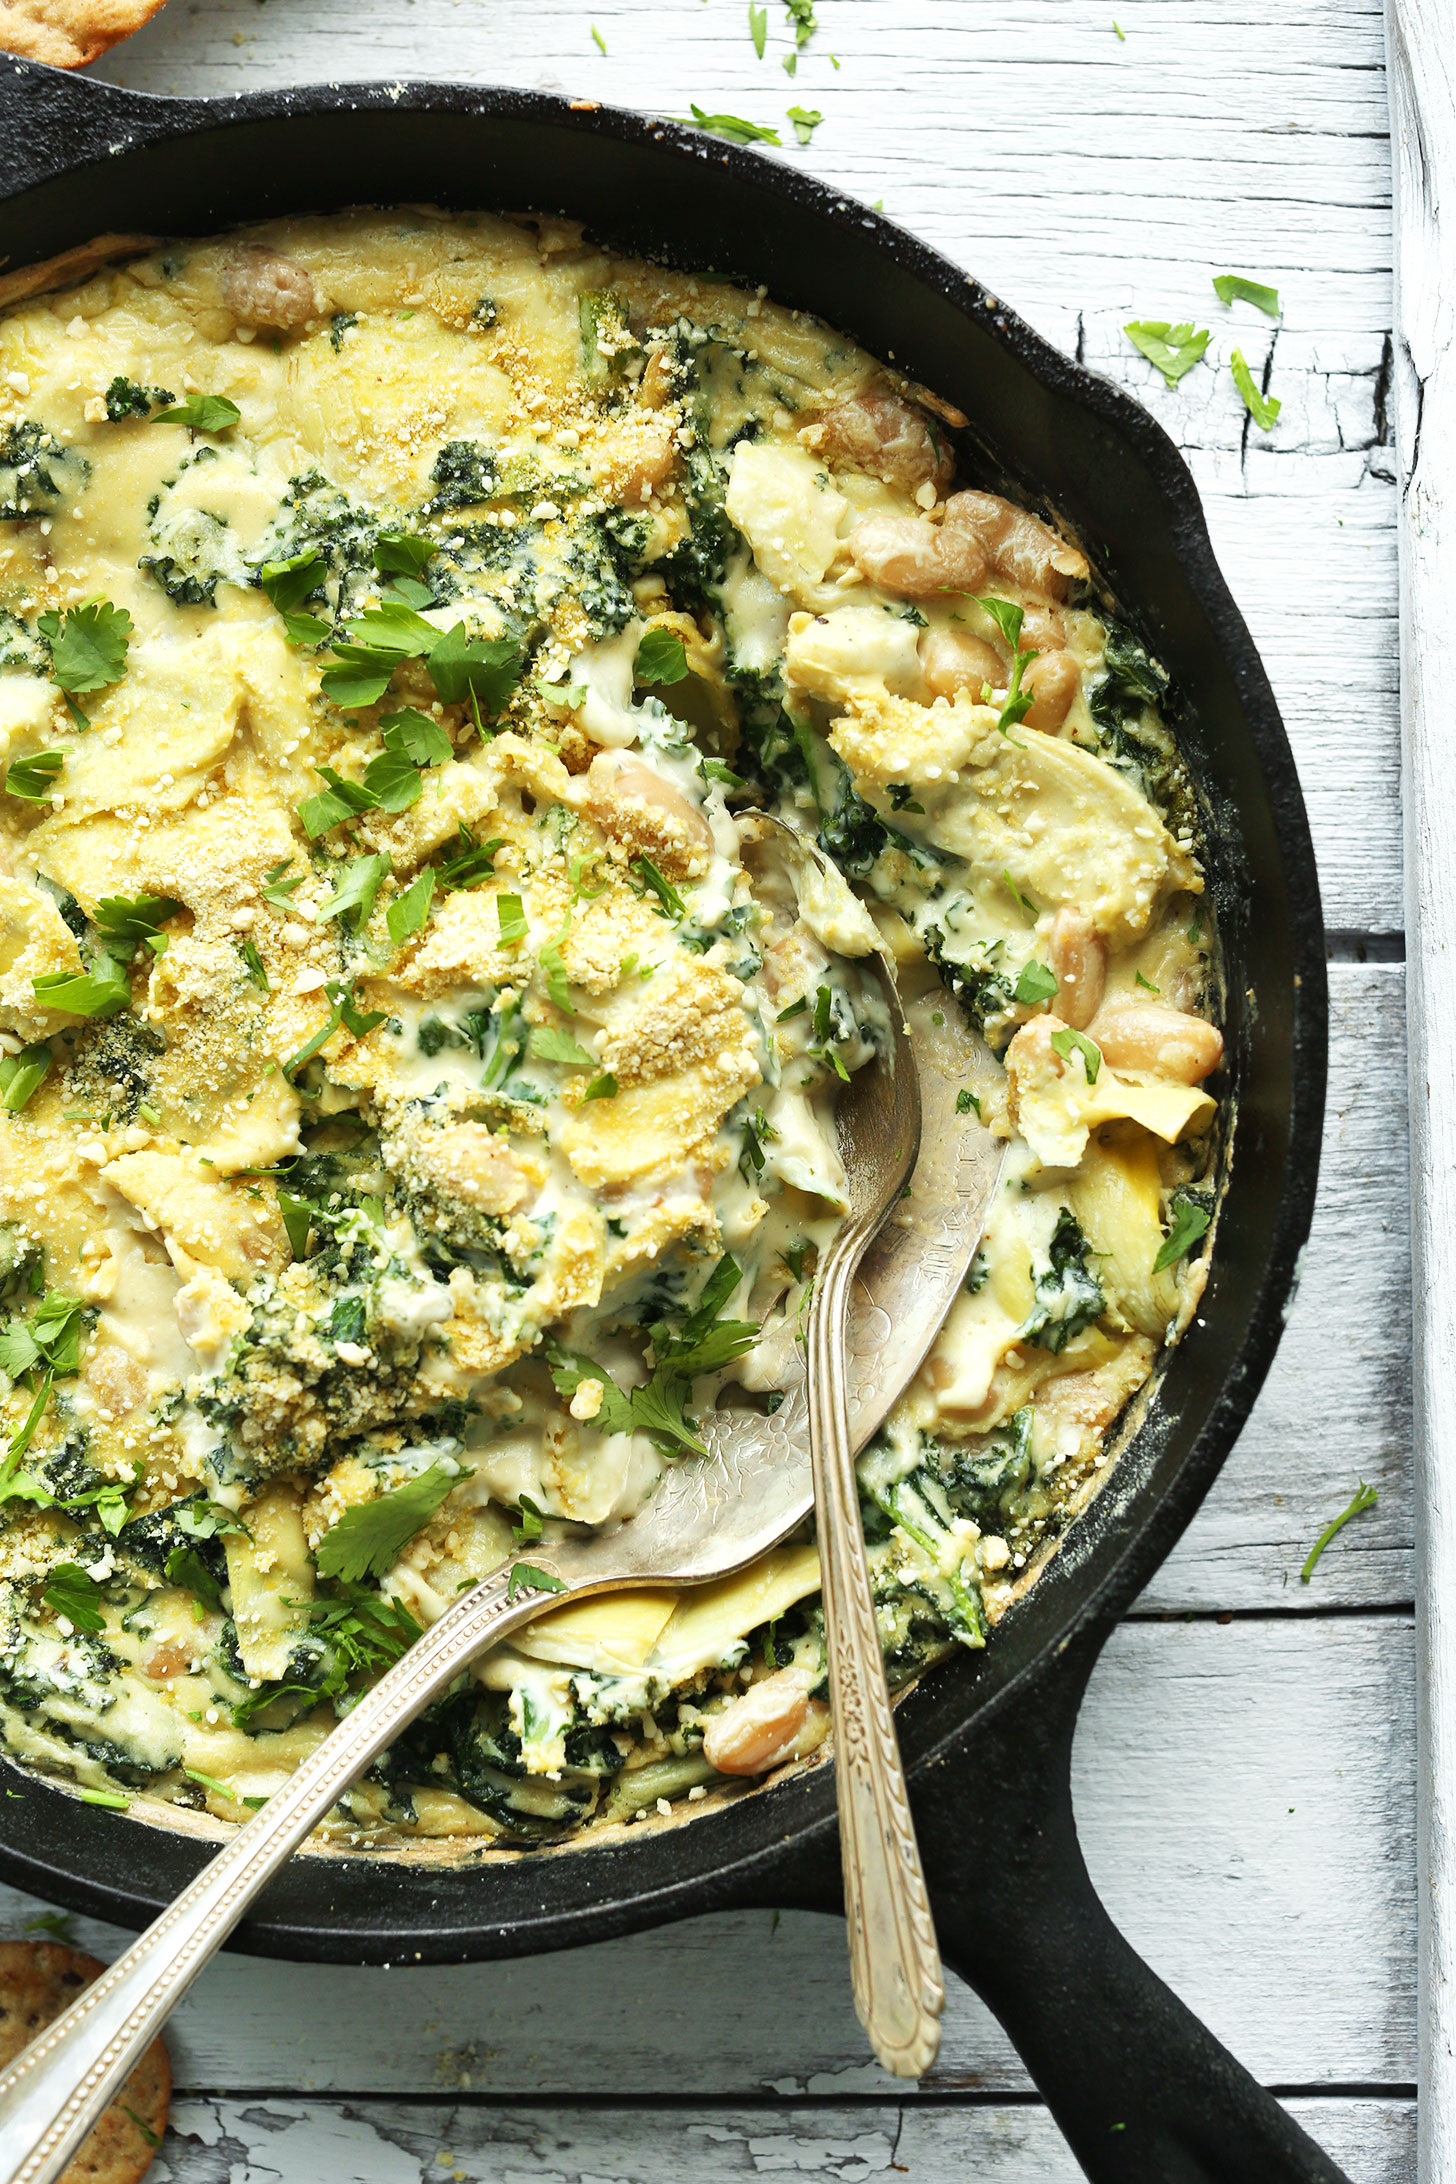 Cast-iron skillet filled with flavorful and delicious Kale & White Bean vegan Artichoke Dip